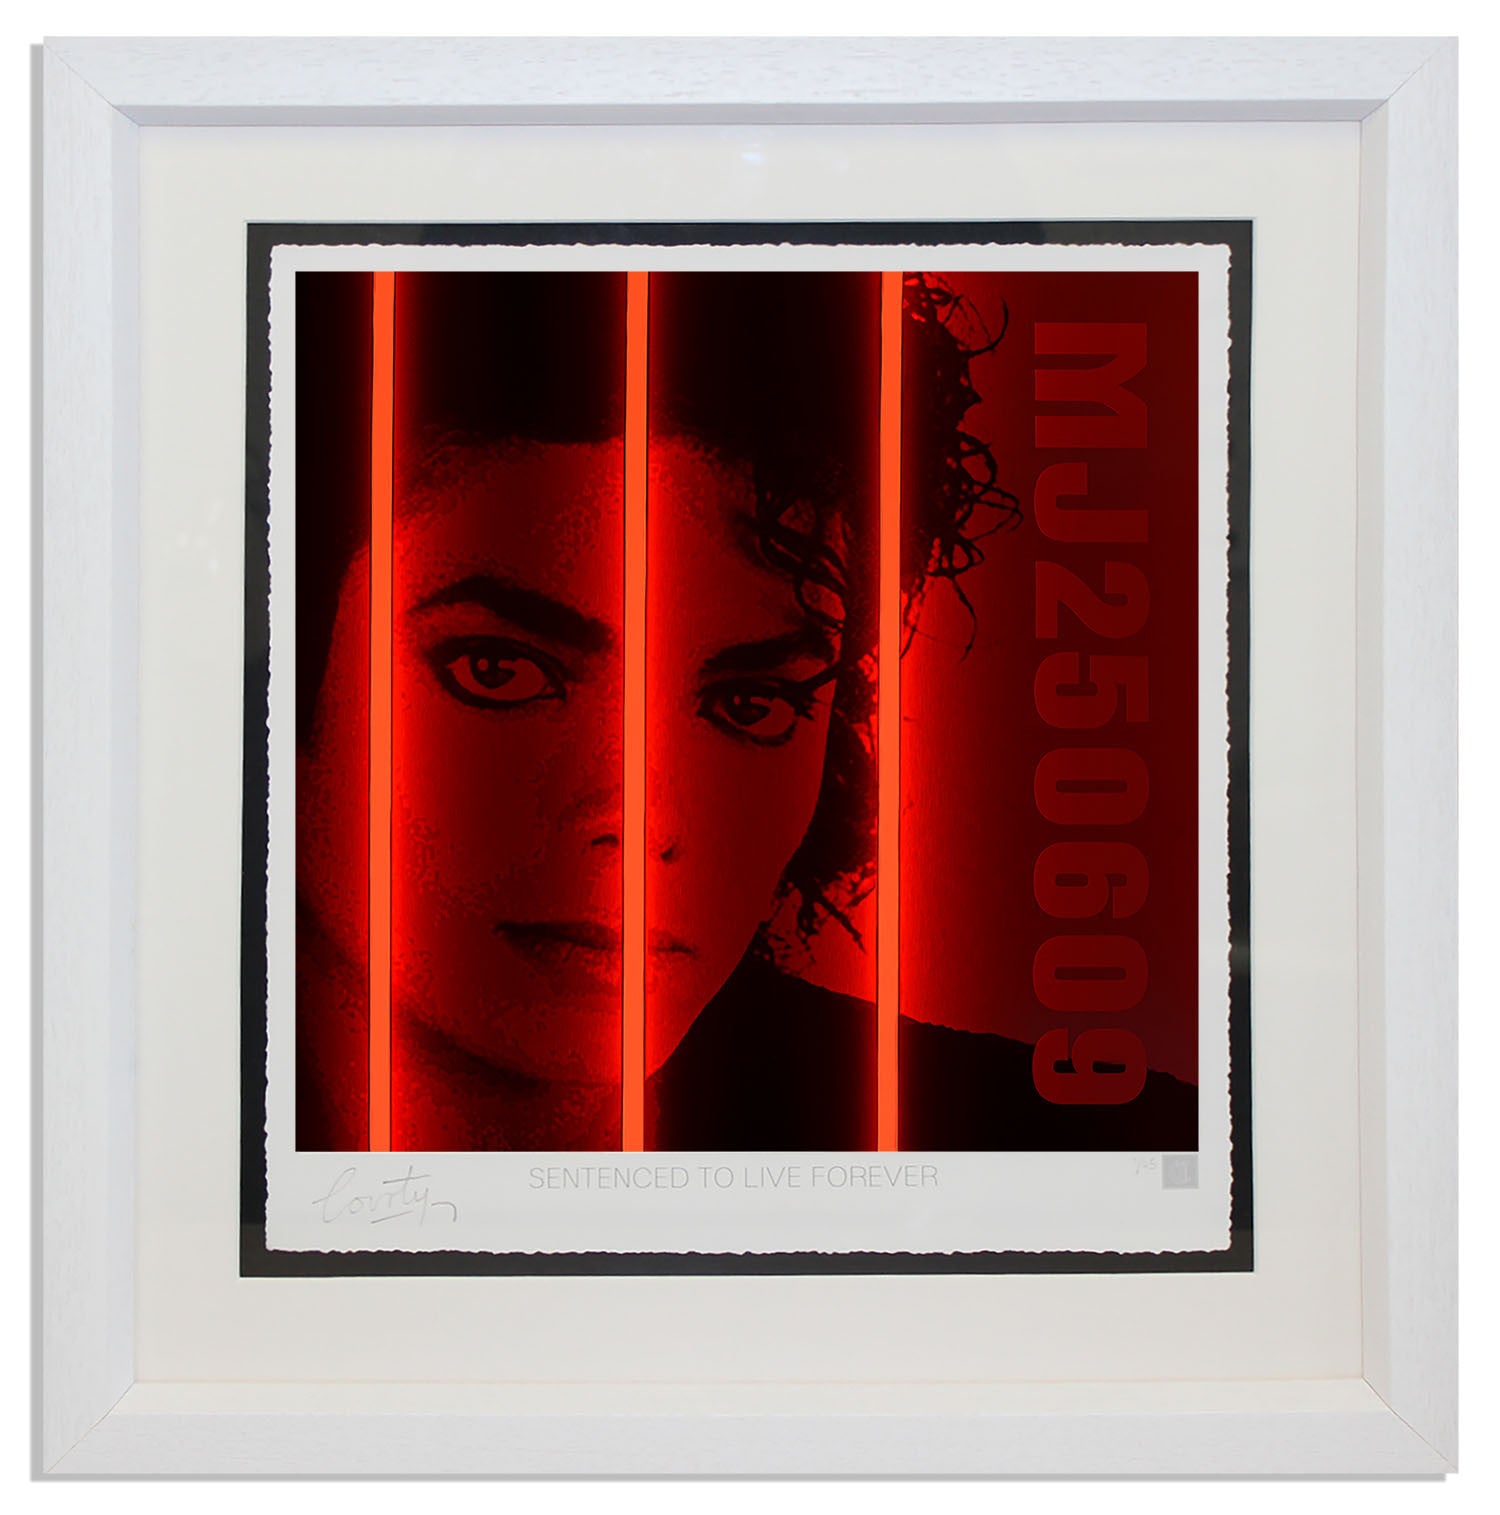 "Michael Jackson" by Courty (FRAMED limited edition screen print)